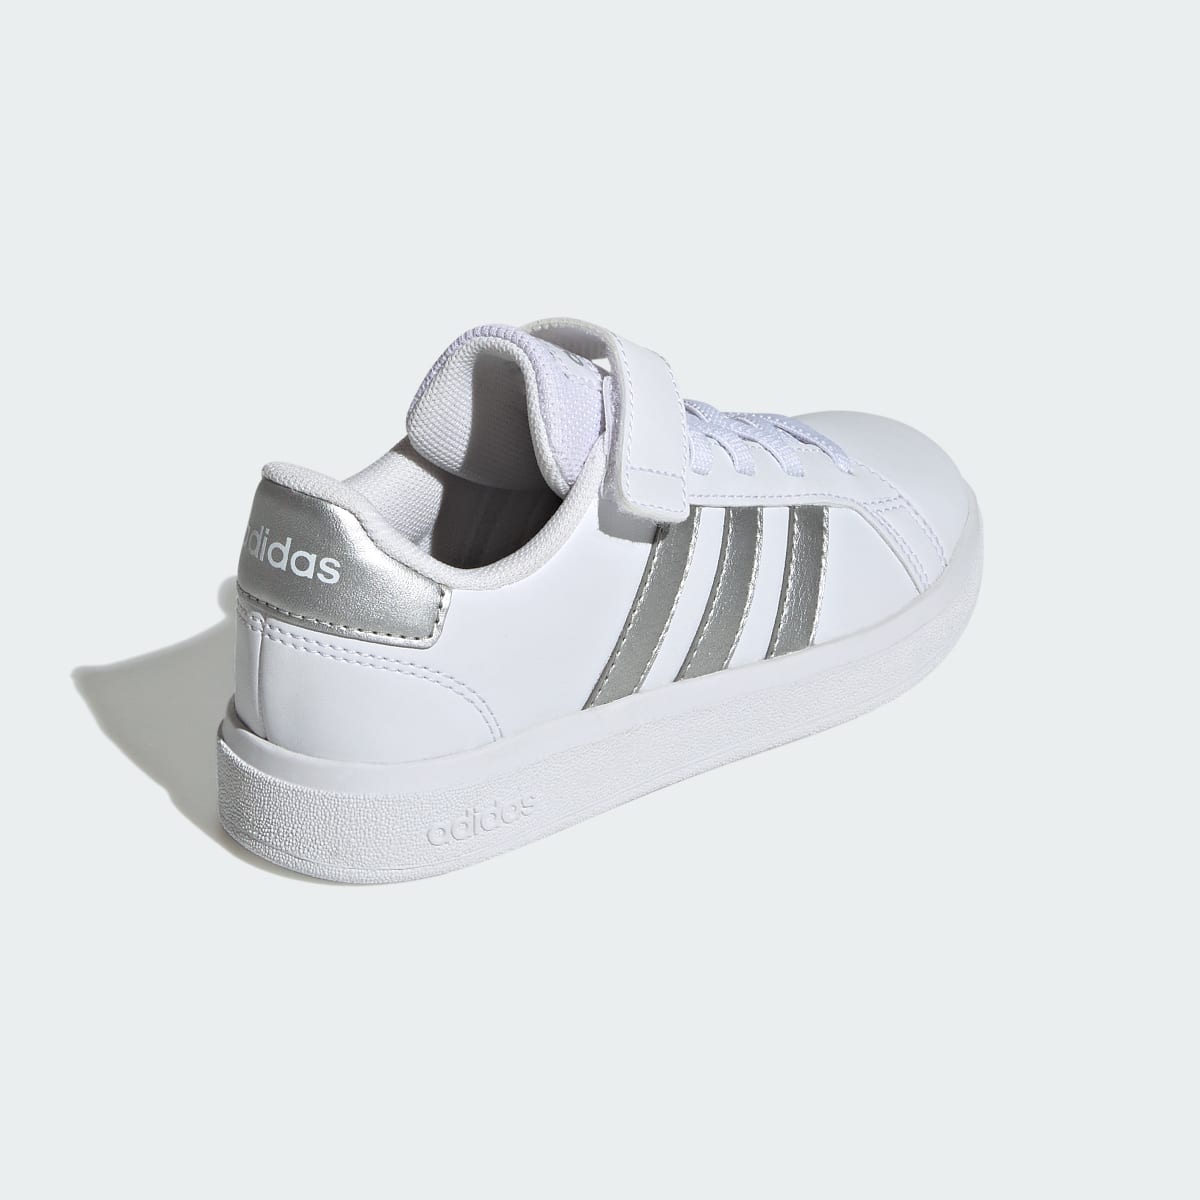 Adidas Grand Court Court Elastic Lace and Top Strap Shoes. 6